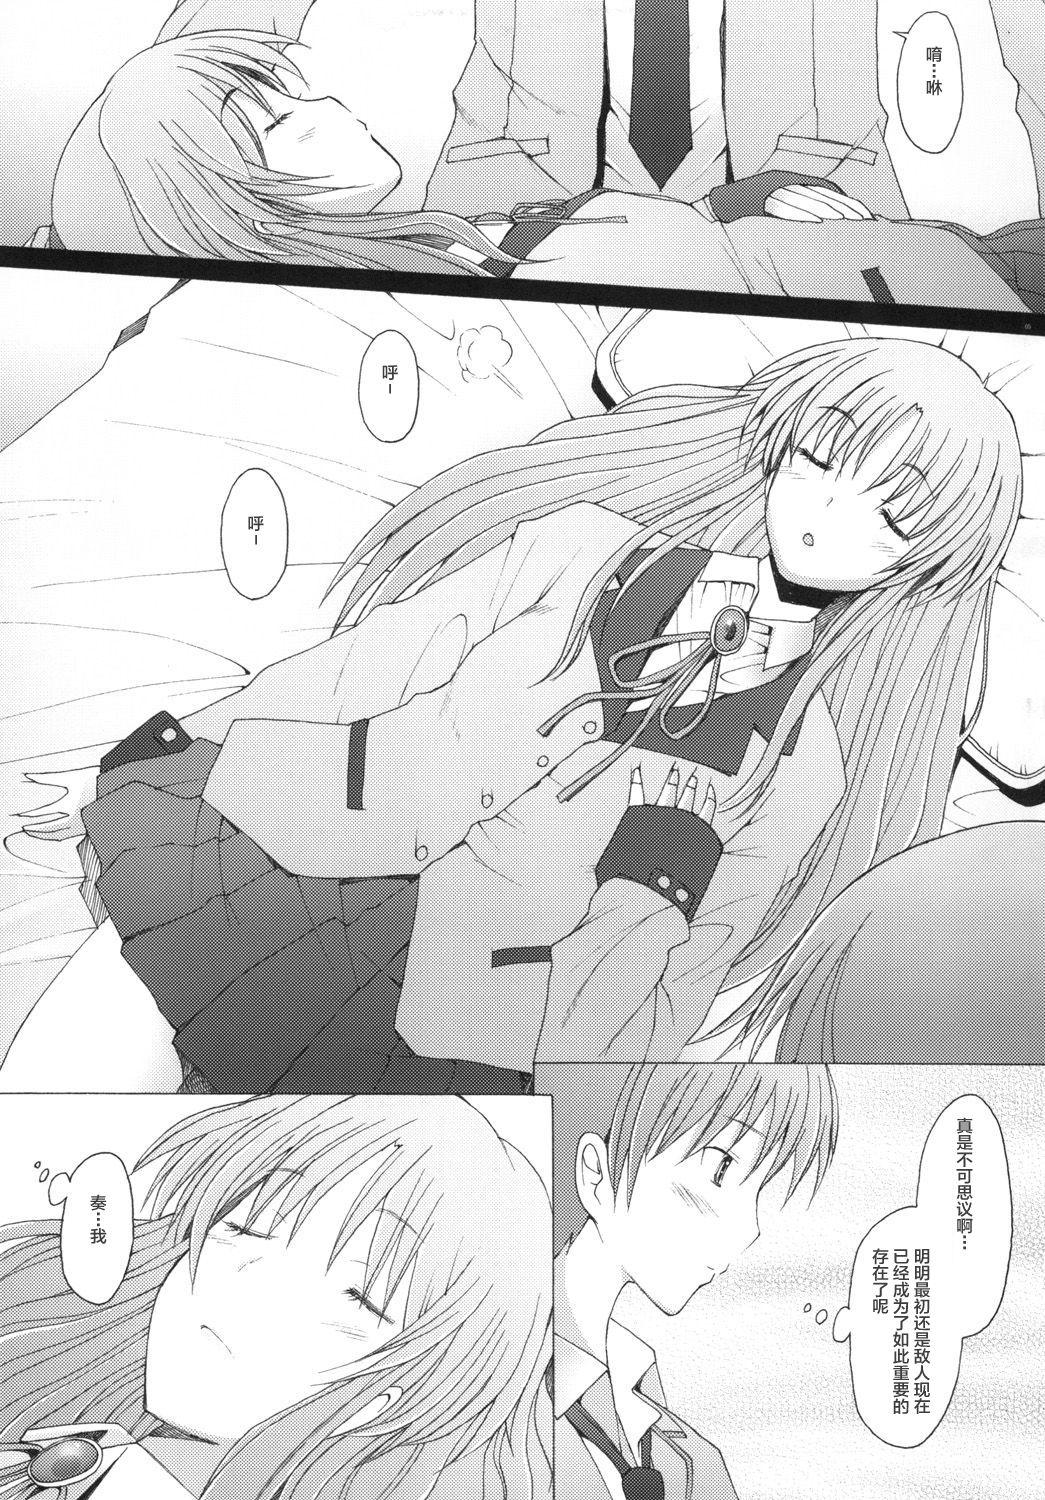 Beurette Holy Silence - Angel beats Hardcore Sex - Page 5